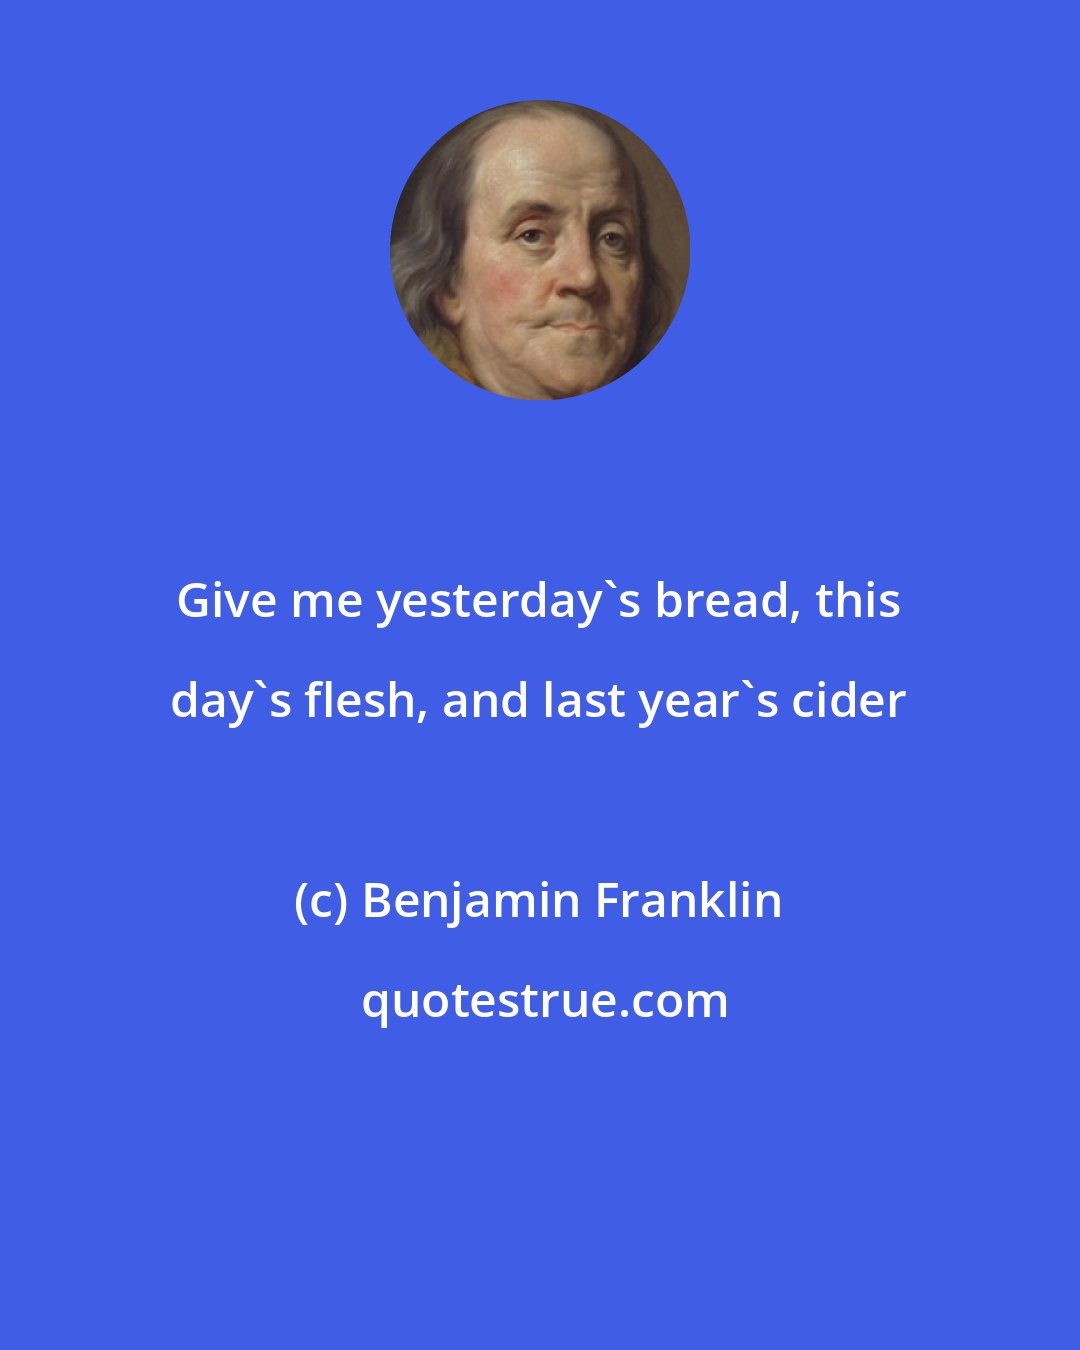 Benjamin Franklin: Give me yesterday's bread, this day's flesh, and last year's cider